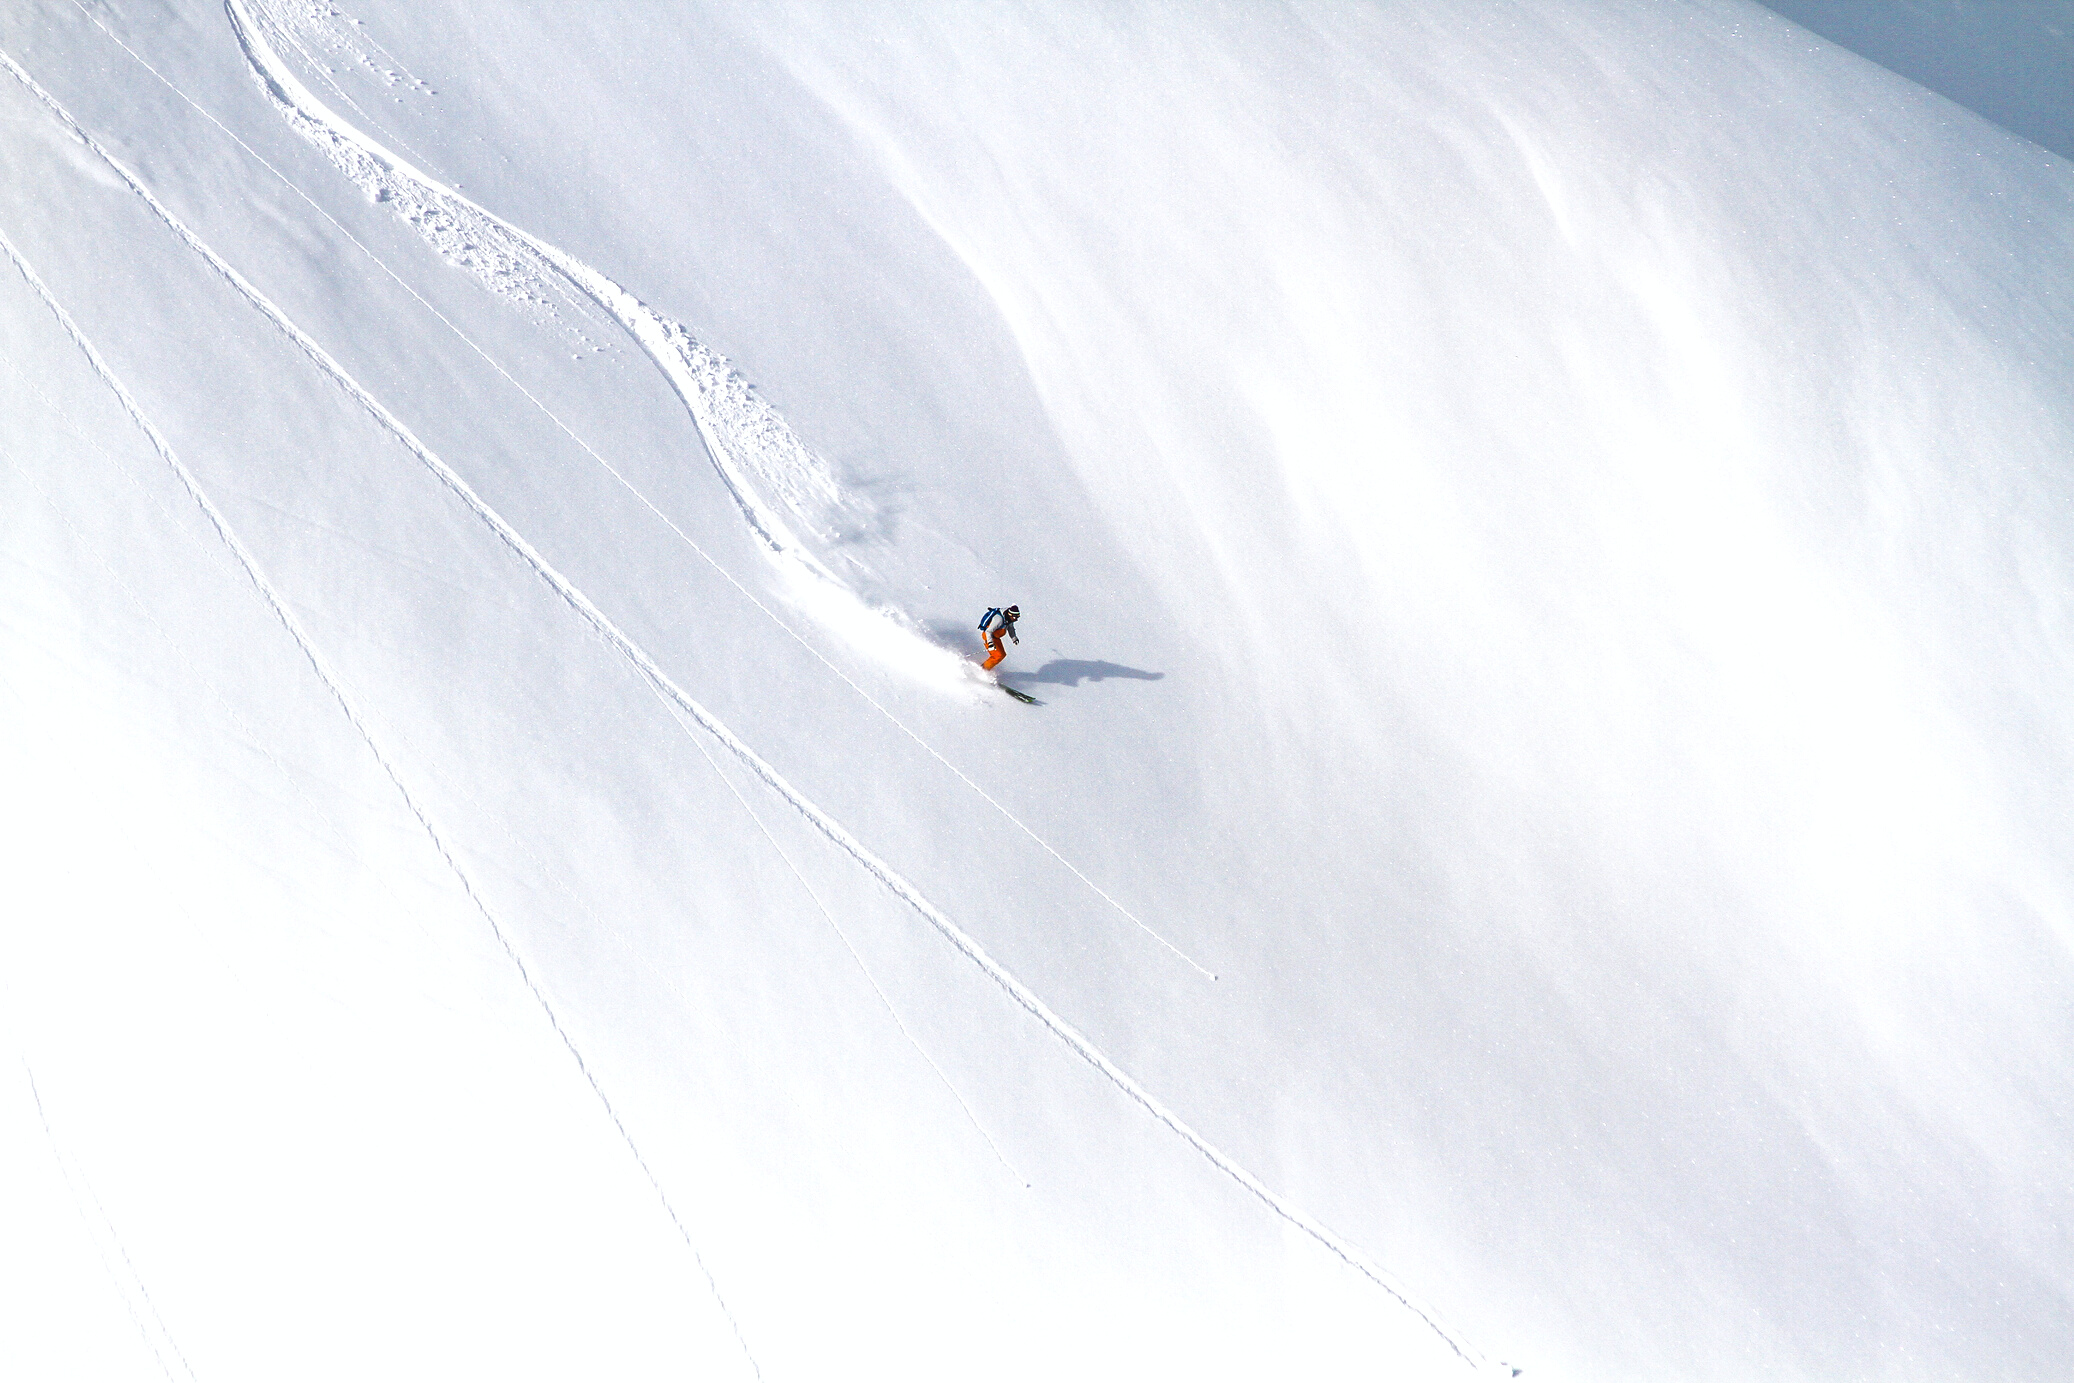 A Person Skiing on Snow Covered Mountain